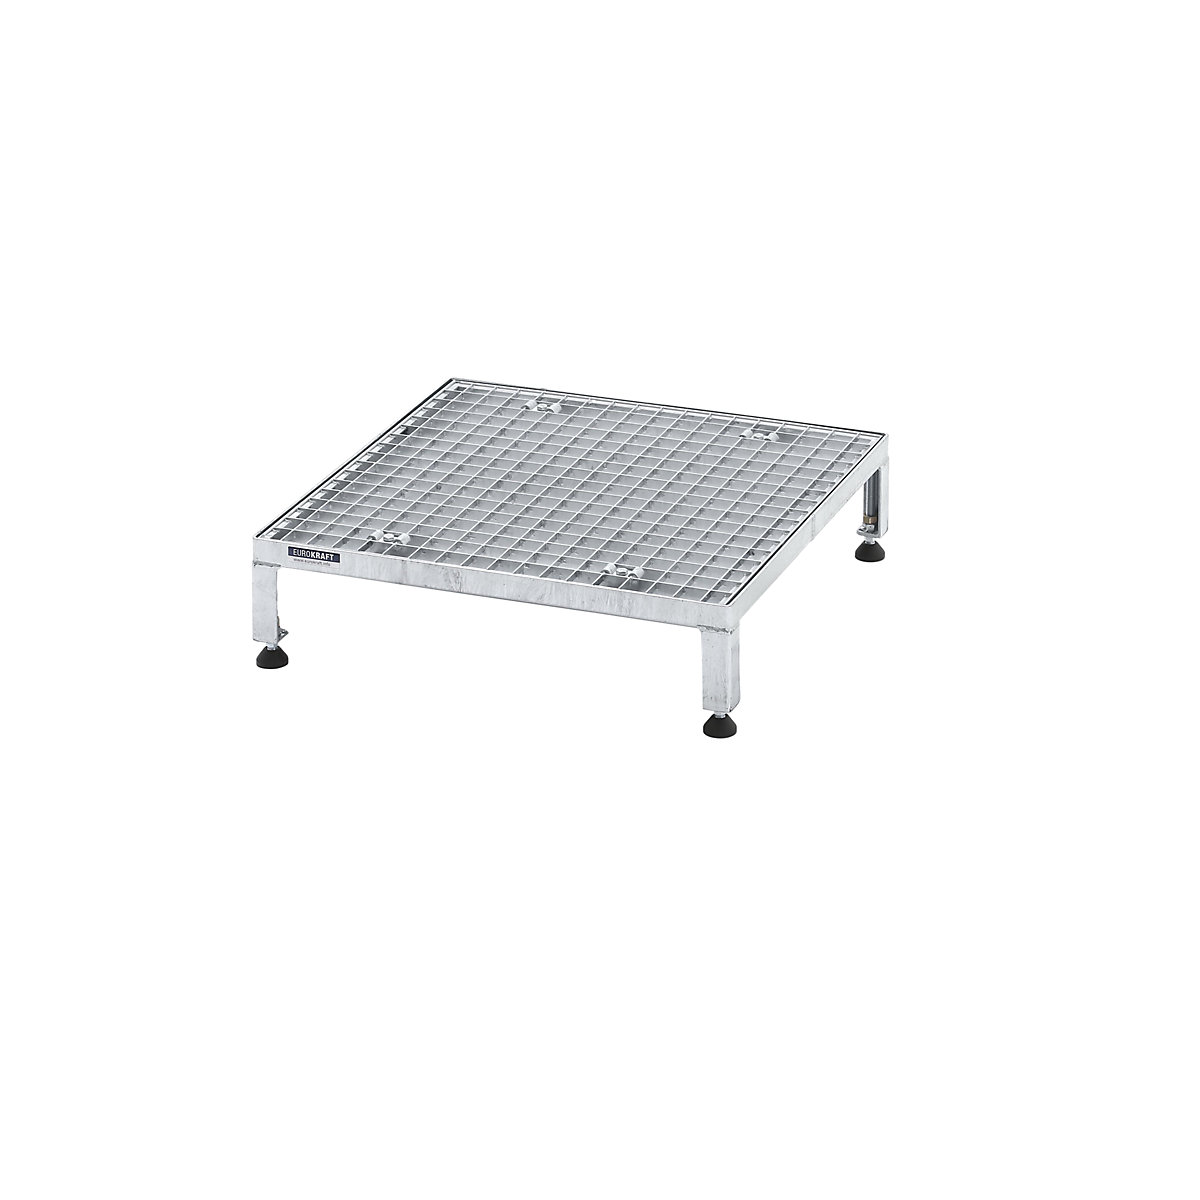 Working platform, height adjustable from 165 – 230 mm – eurokraft pro, with mesh plate, platform LxW 610 x 610 mm, hot dip galvanised-12